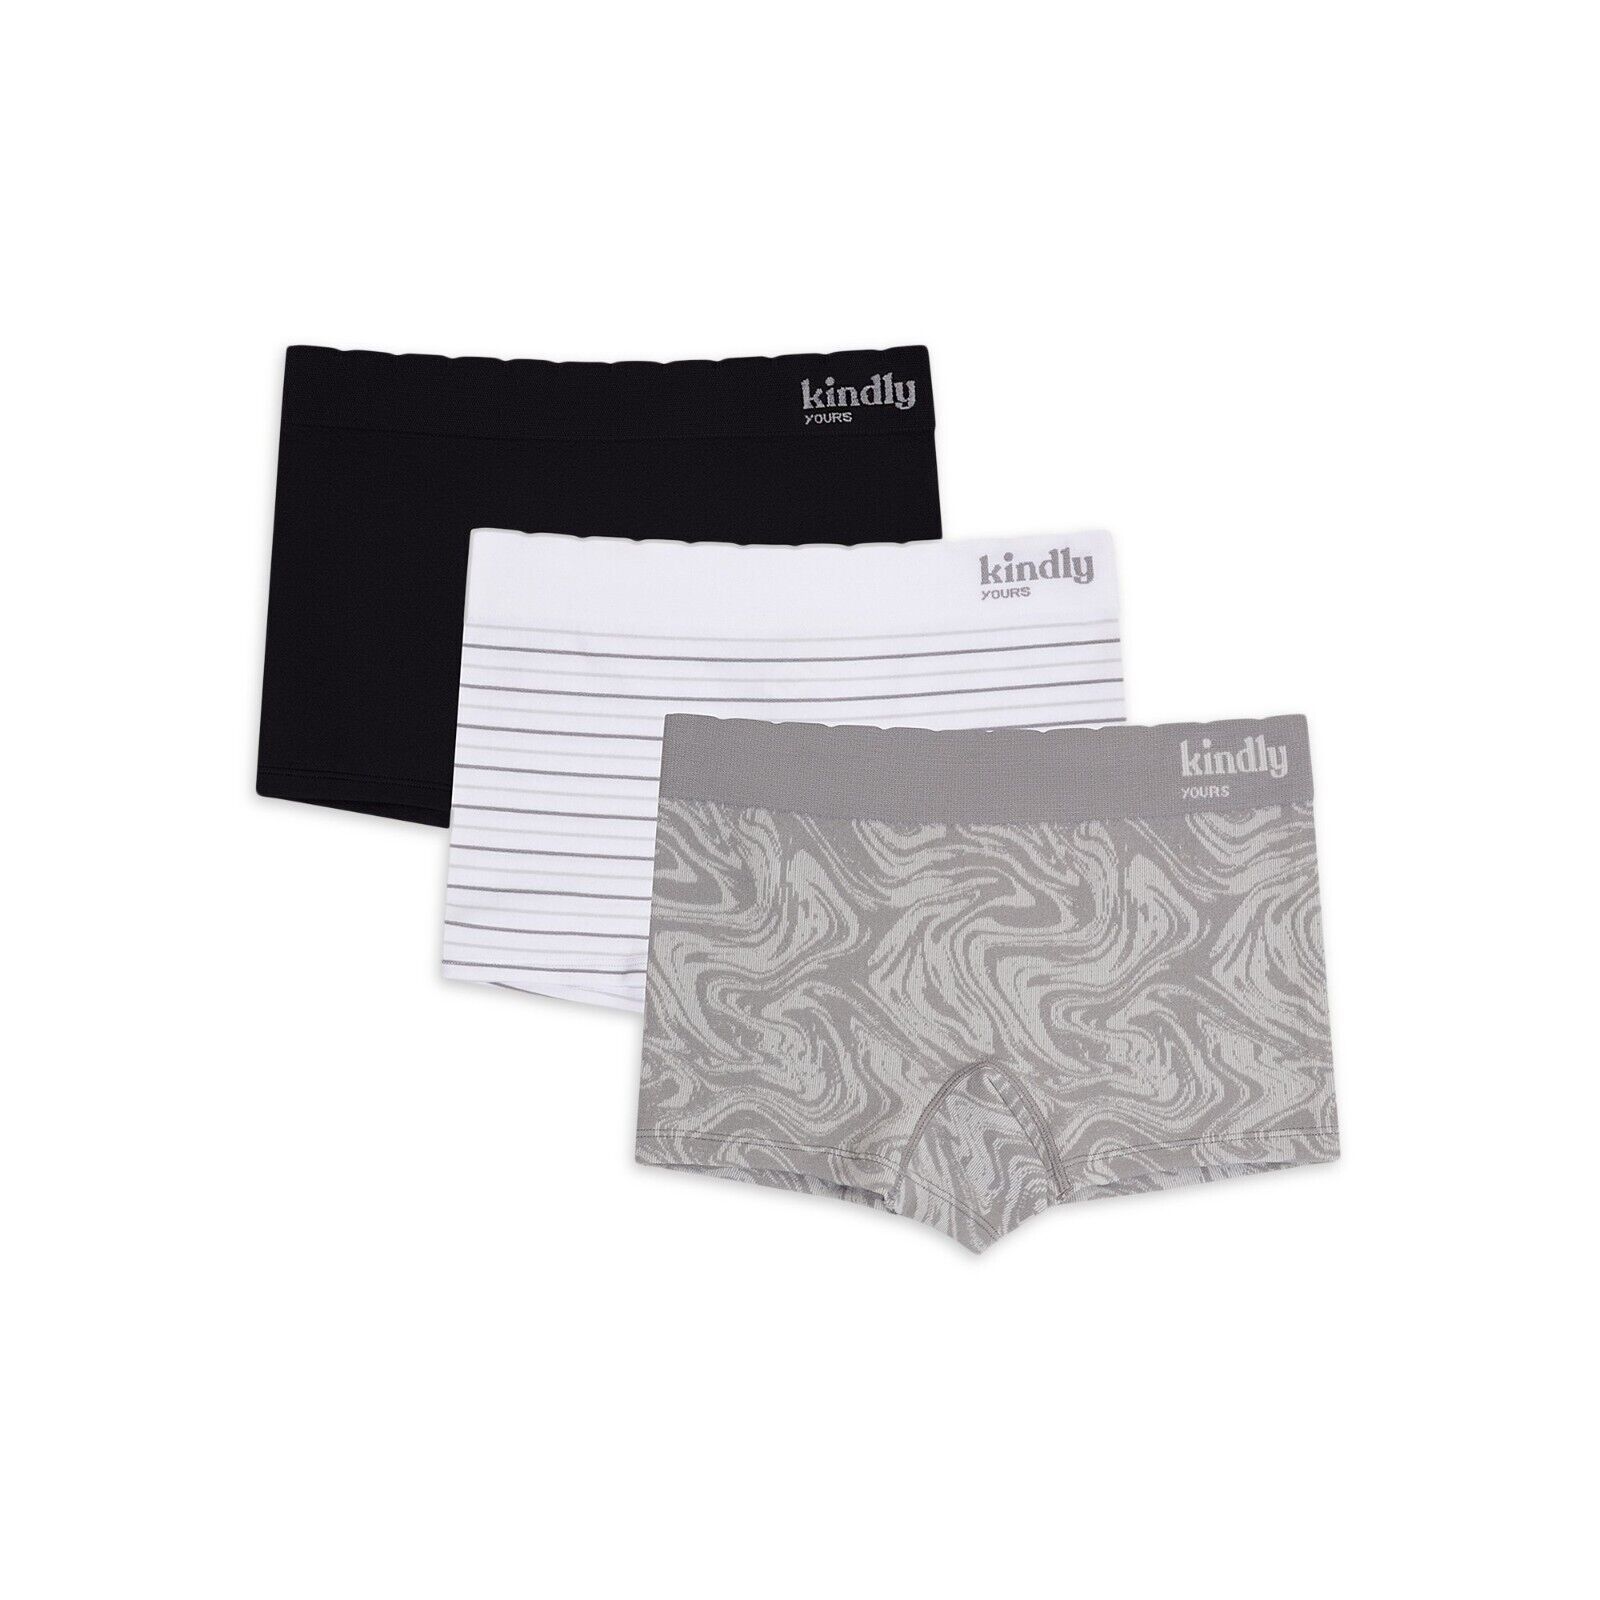 Kindly Yours 3-PACK Sustainable Seamless and 50 similar items